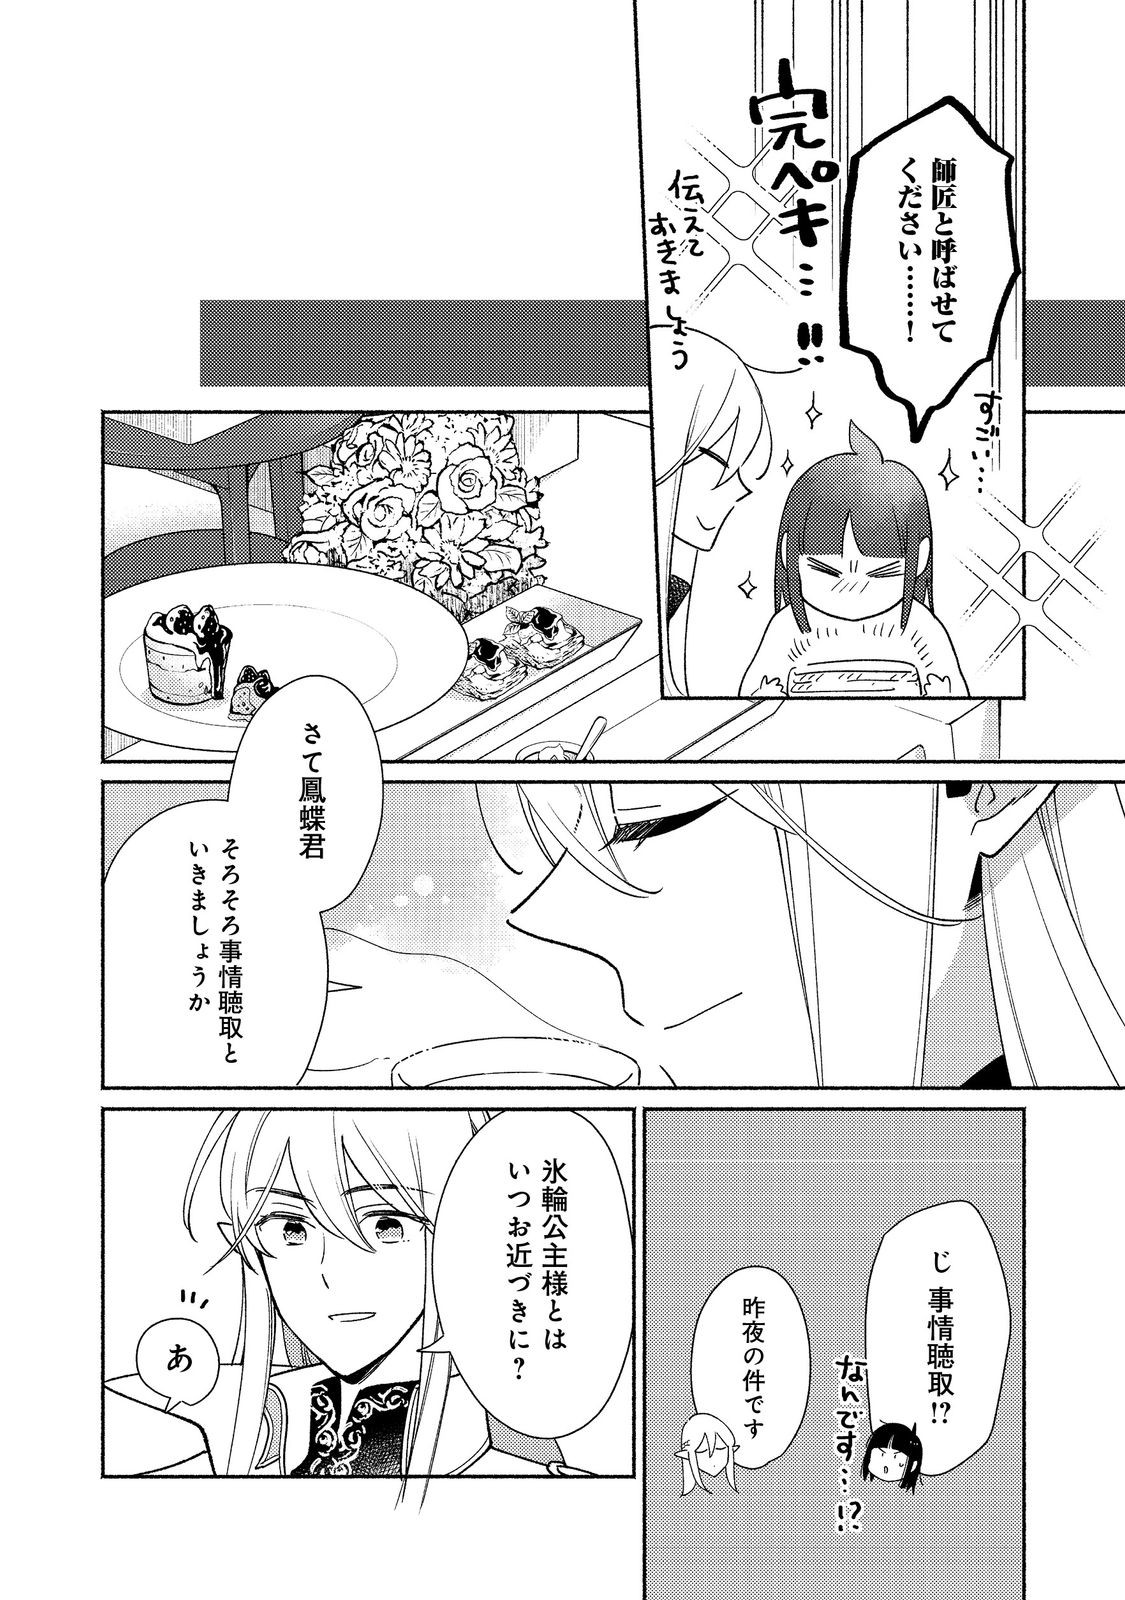 I’m the White Pig Nobleman 第26.2話 - Page 5